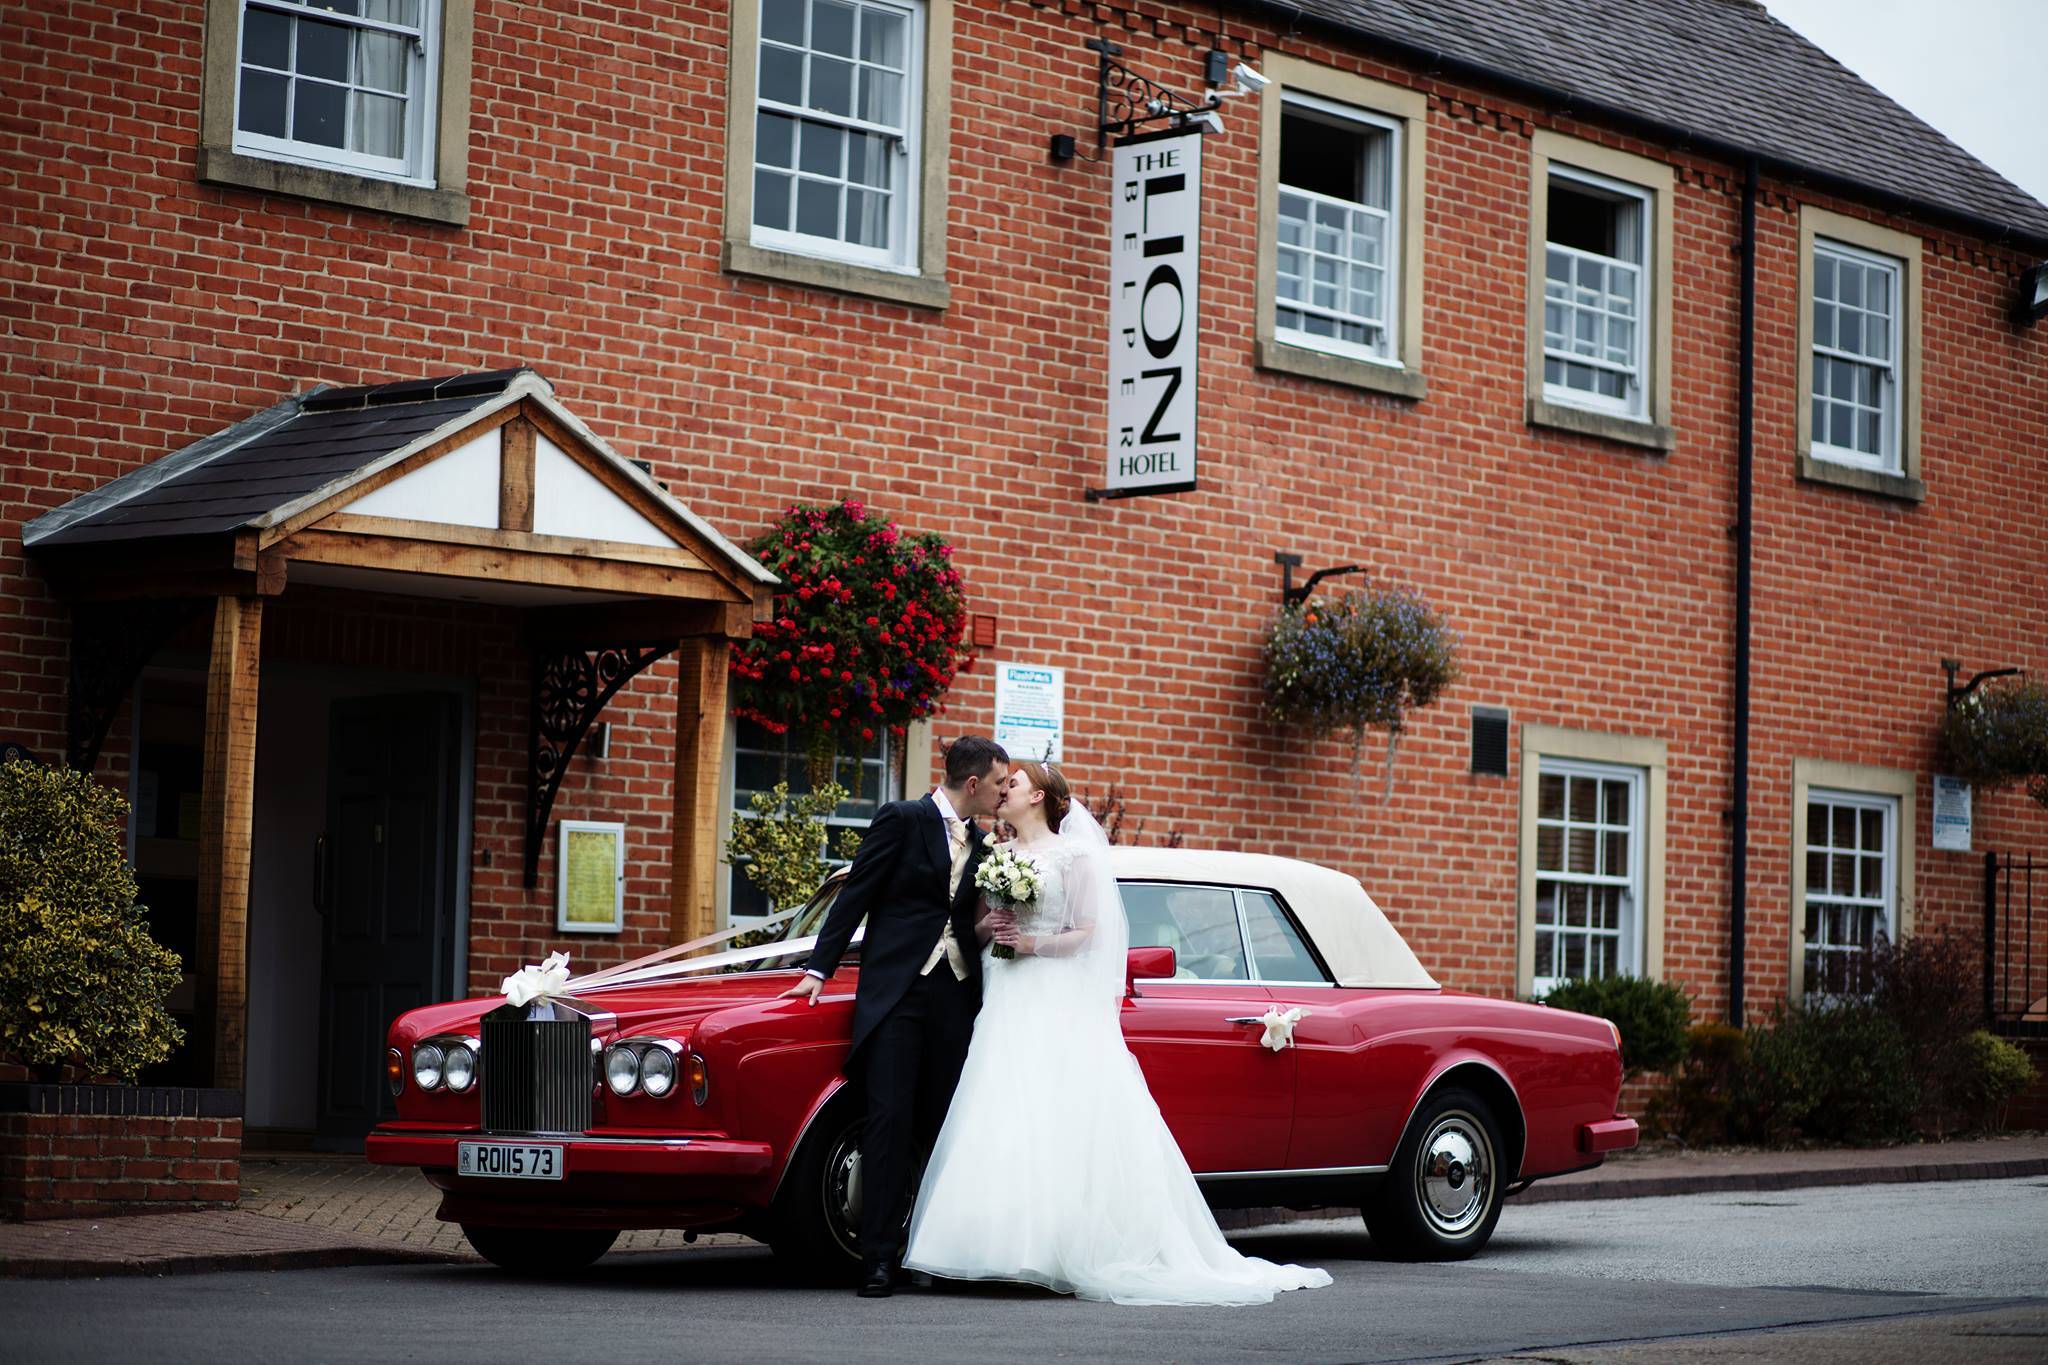 Newly Weds in Front Of Lion Hotel - Wedding Venues in Derbyshire